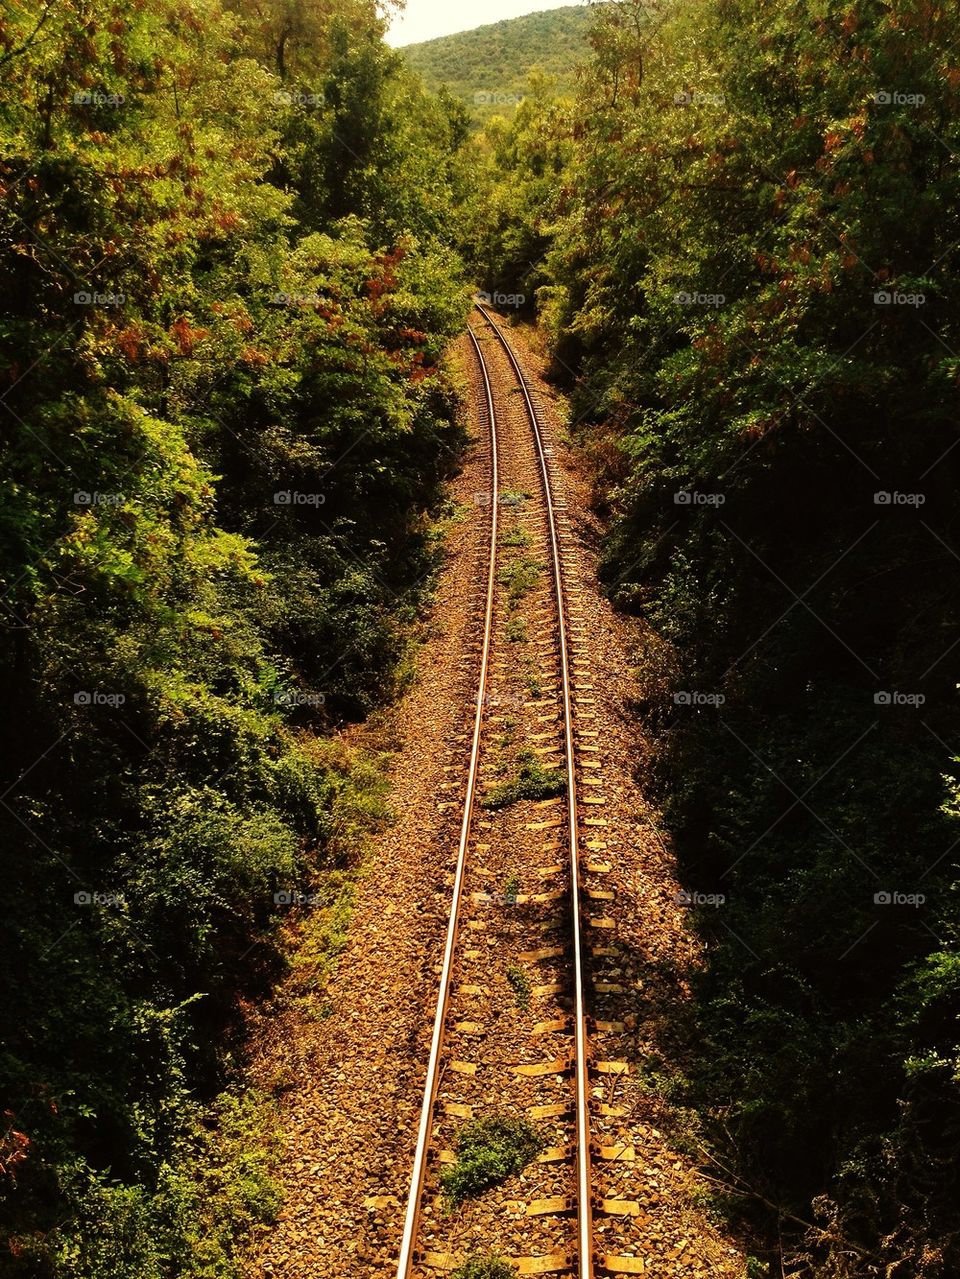 Trees along the railroad track in forest